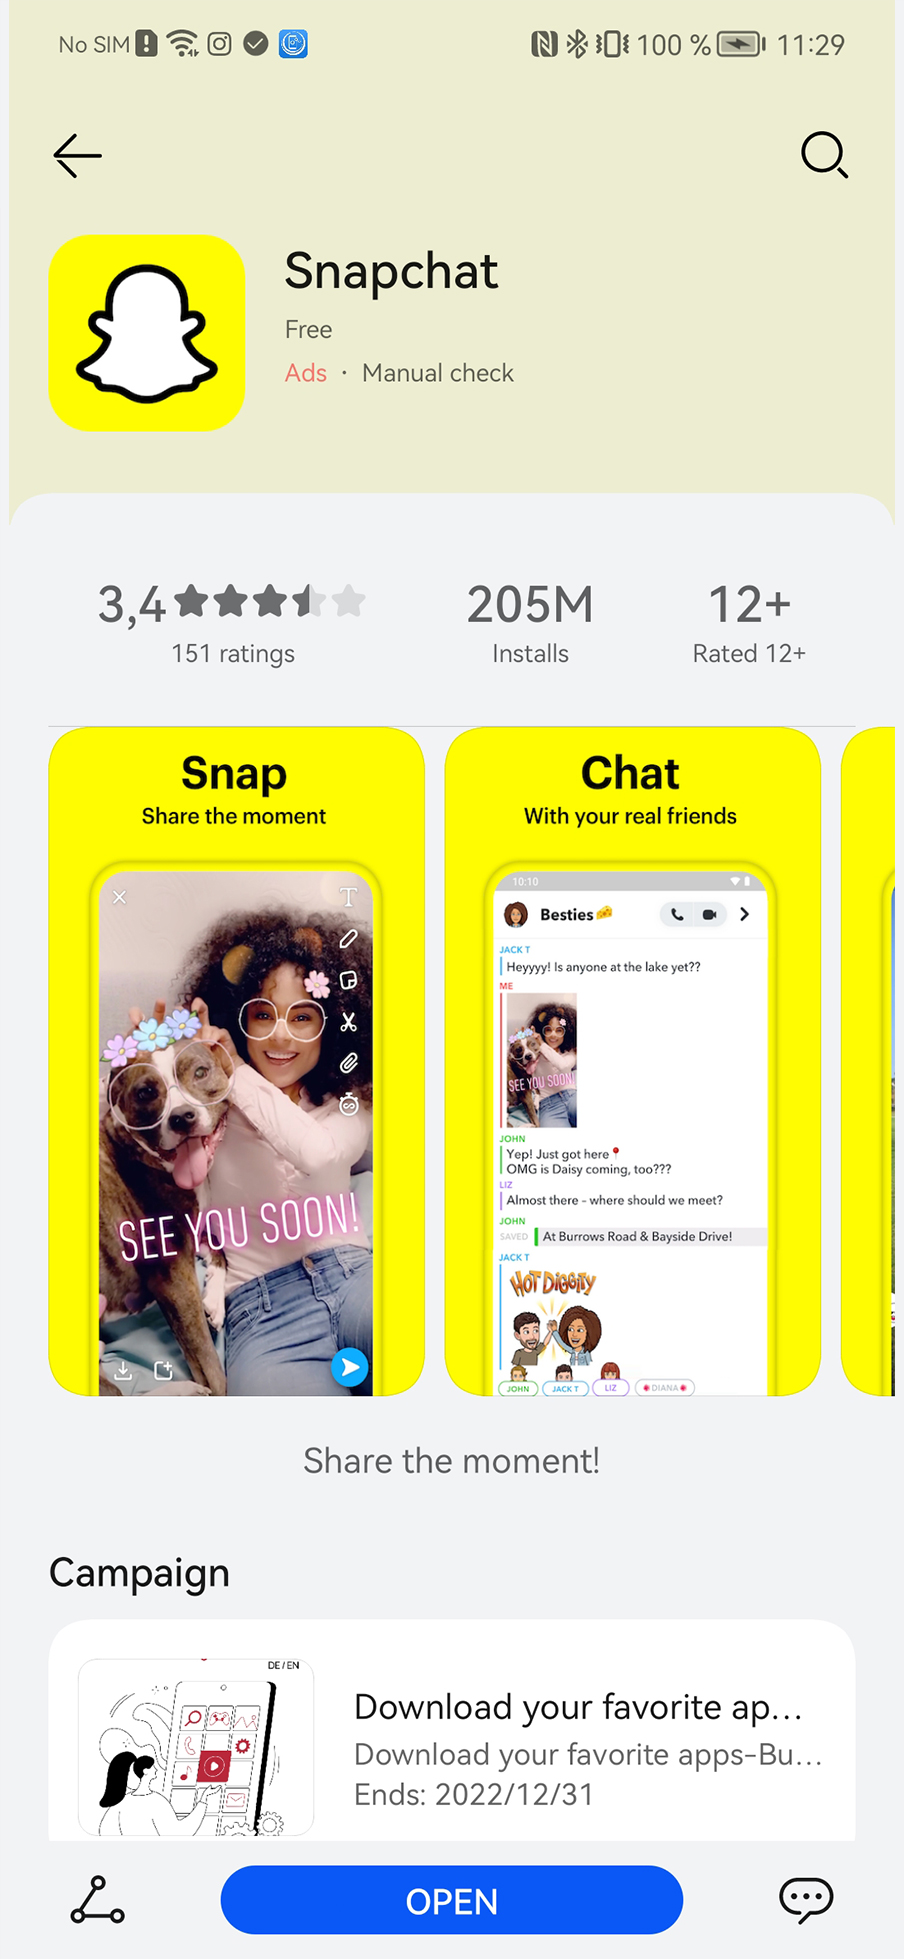 Petal Search: Millions of Apps and More at Your Fingertips ！